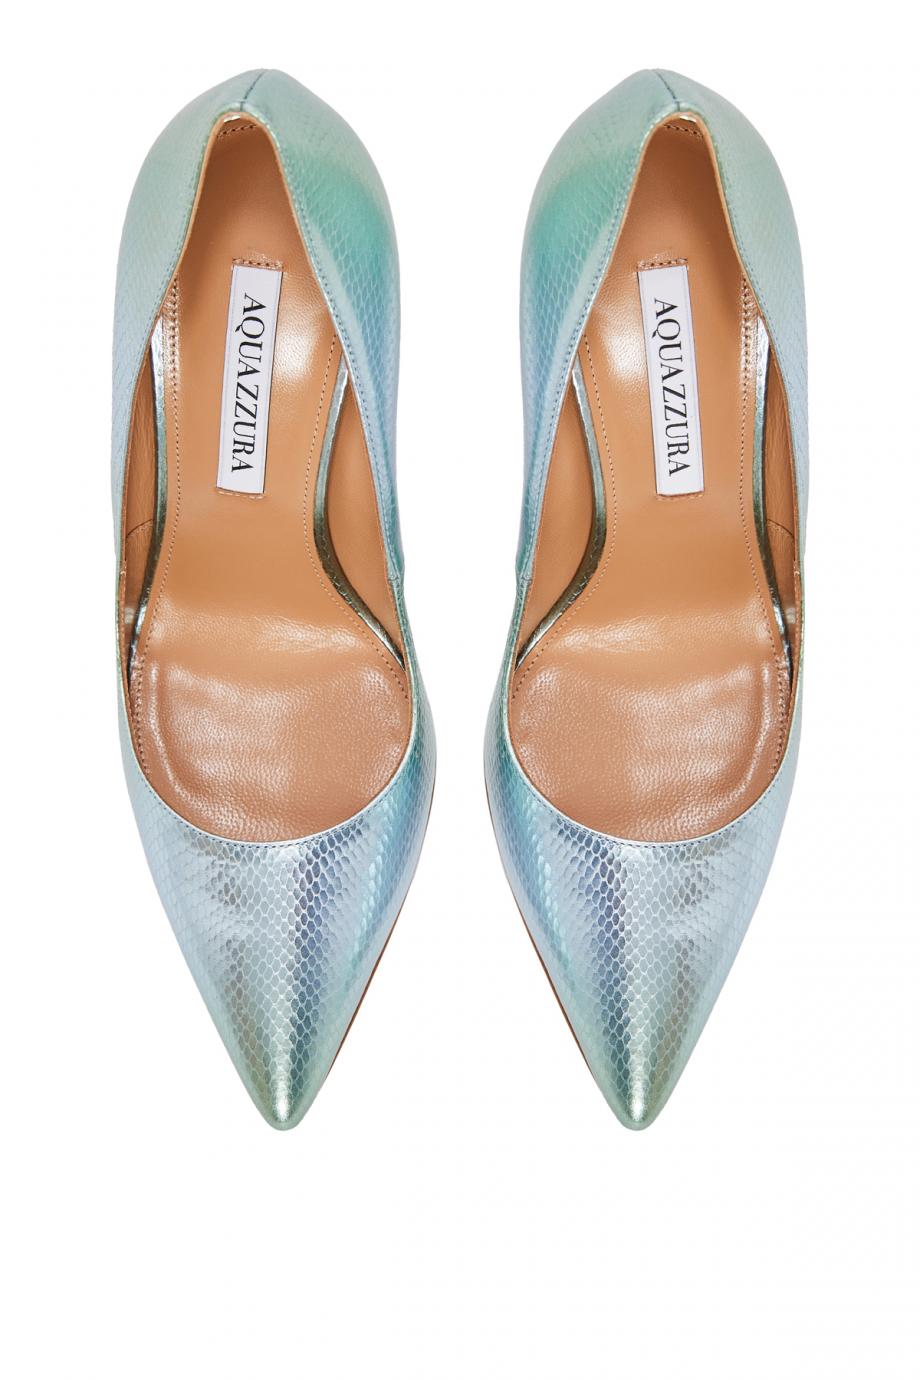 Purist textured-leather pumps